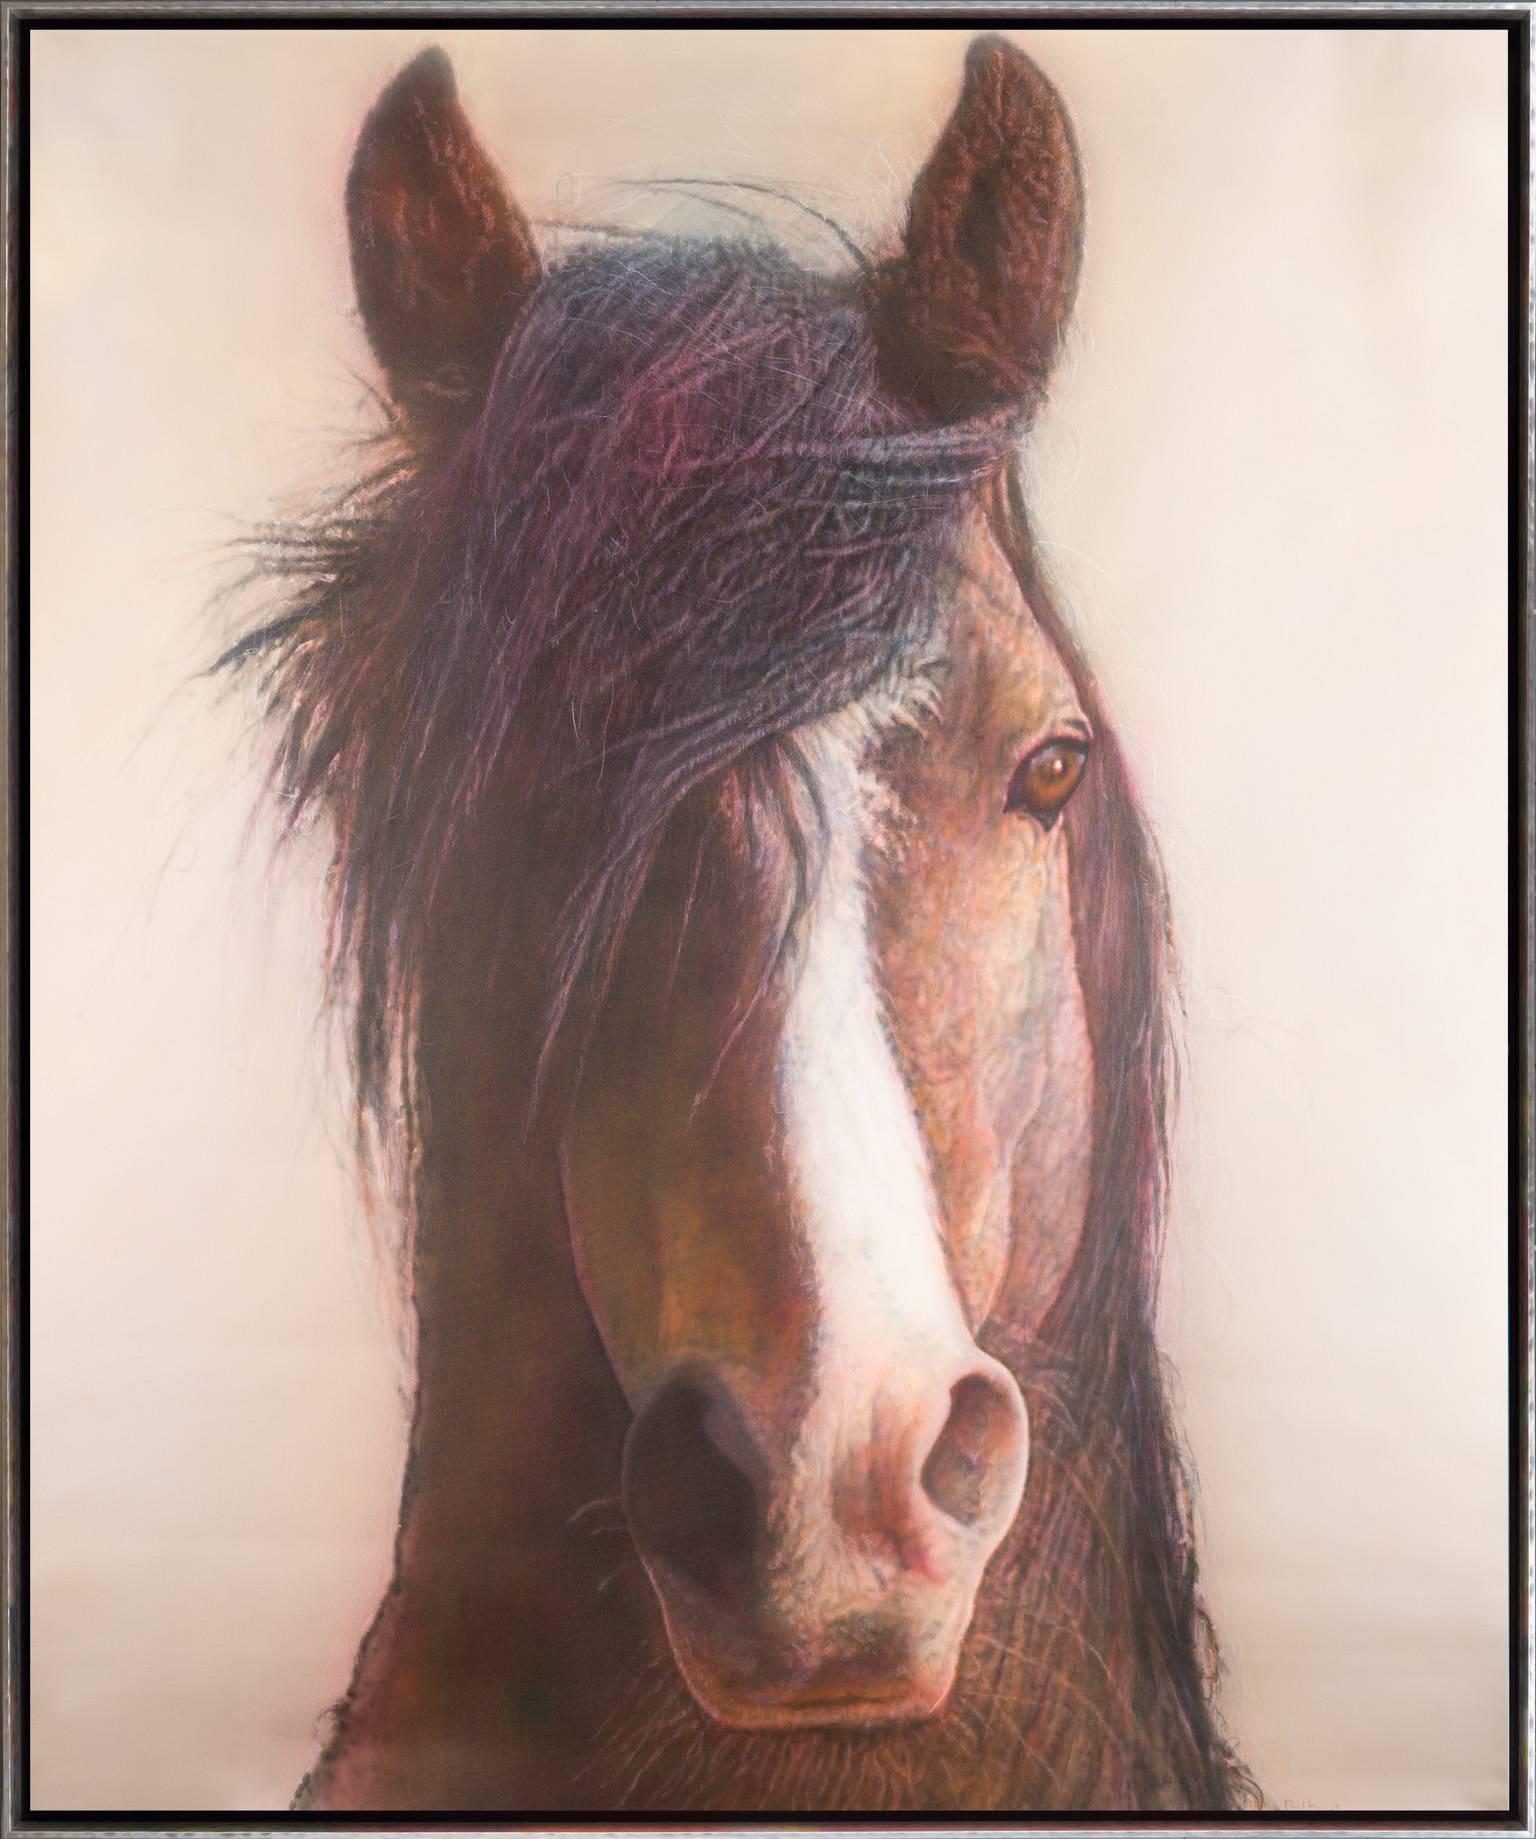 Ray Hare Animal Painting - "I'll Follow You" Strikingly Realistic Horse Portrait Painting